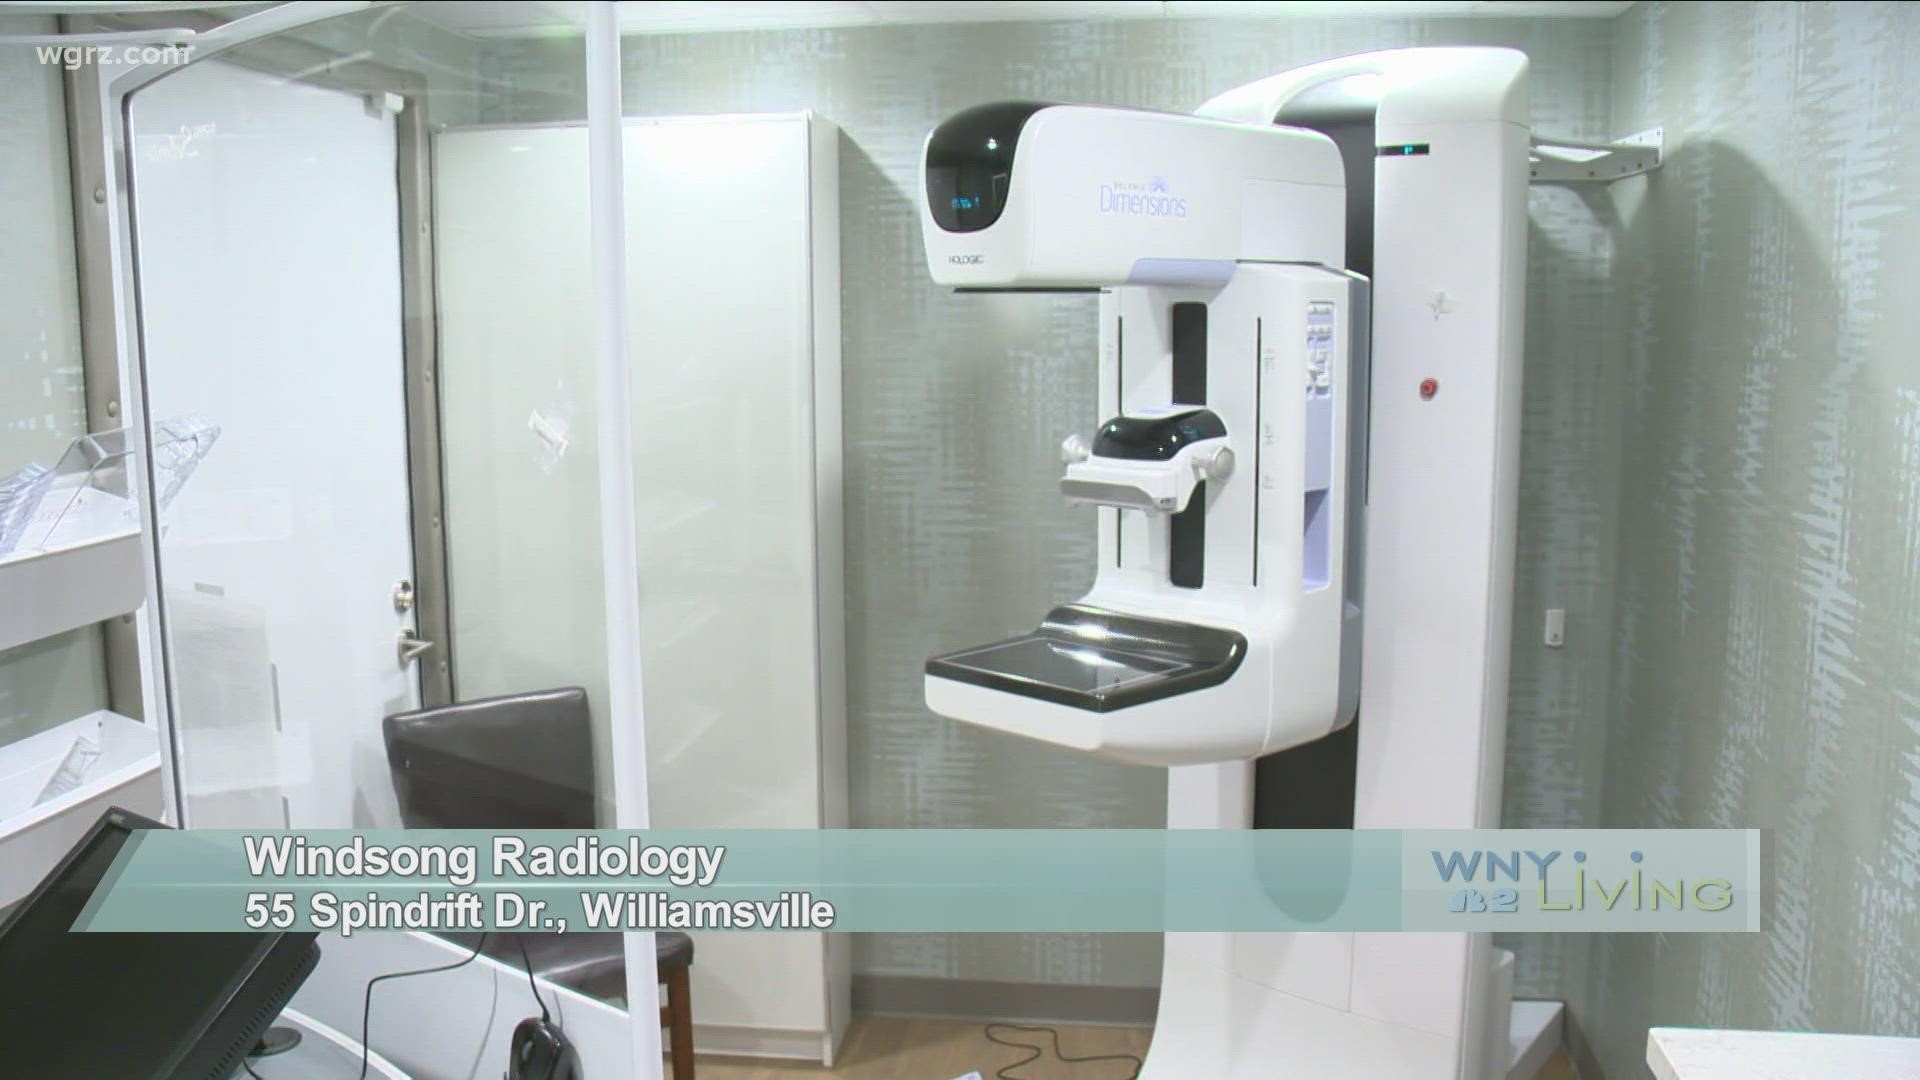 WNY Living - November 13 - Windsong Radiology (THIS VIDEO IS SPONSORED BY WINDSONG RADIOLOGY)